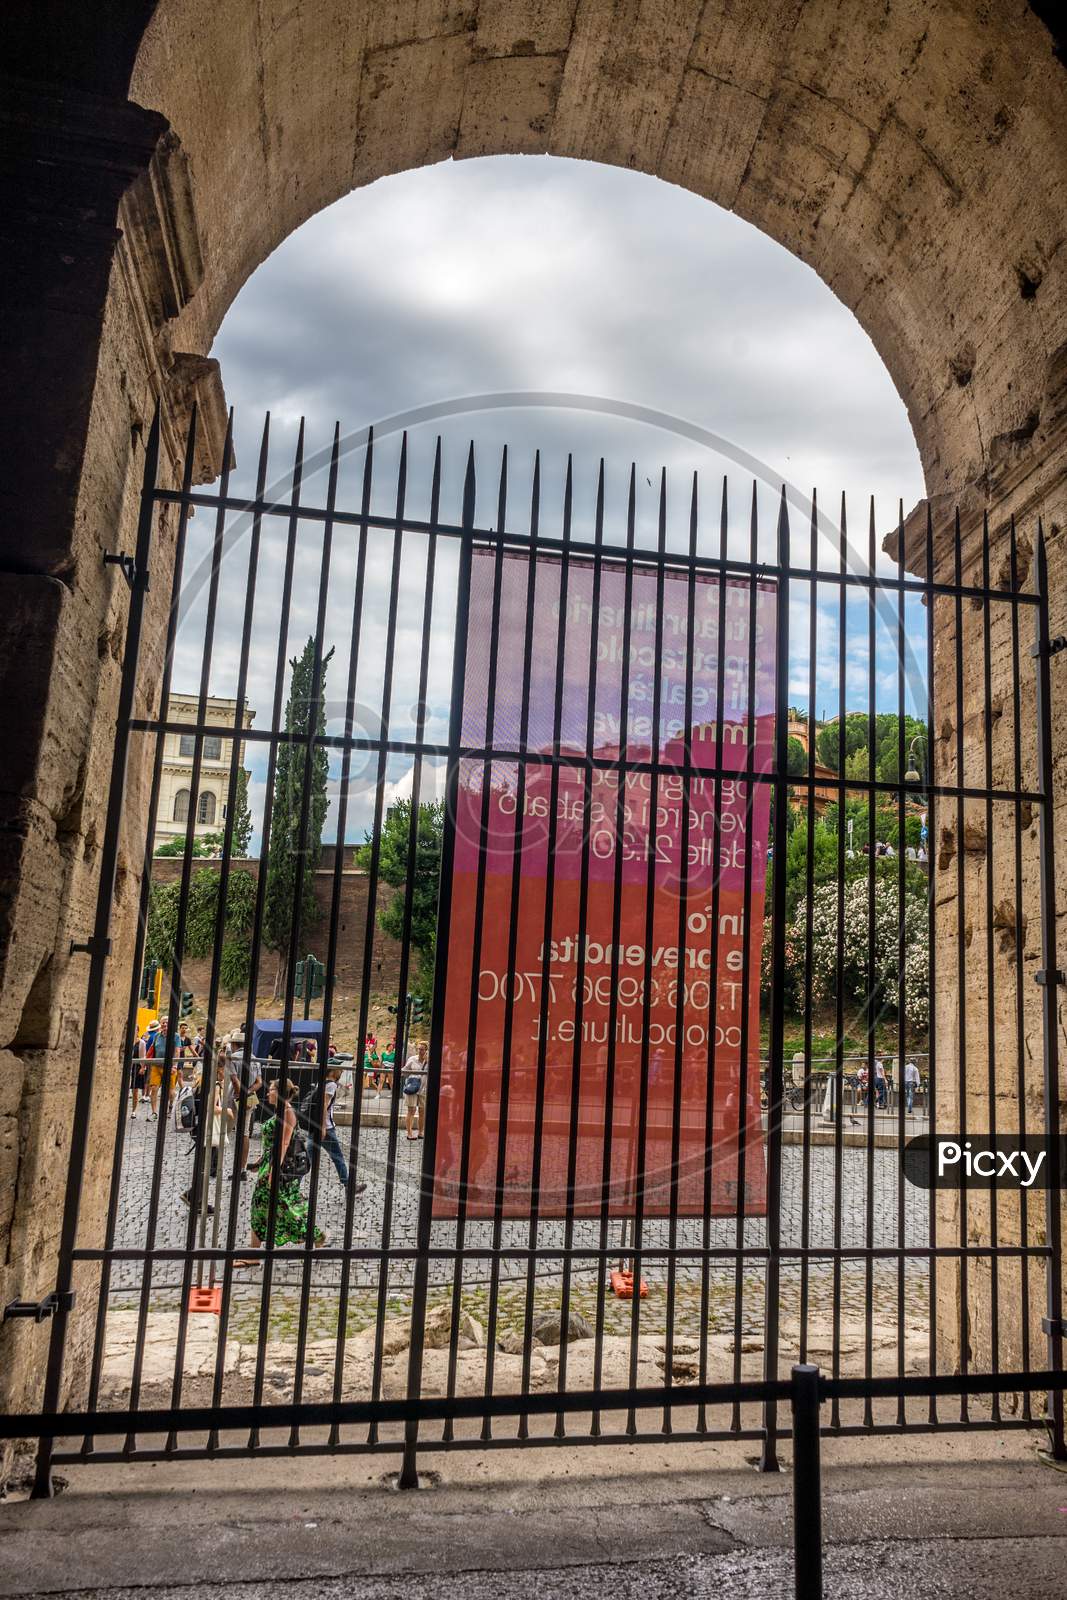 Rome, Italy - 23 June 2018: The Gated Arch Of The Passage At The Entrance Of The Roman Colosseum (Coliseum, Colosseo), Also Known As The Flavian Amphitheatre. Famous World Landmark. Scenic Urban Landscape.